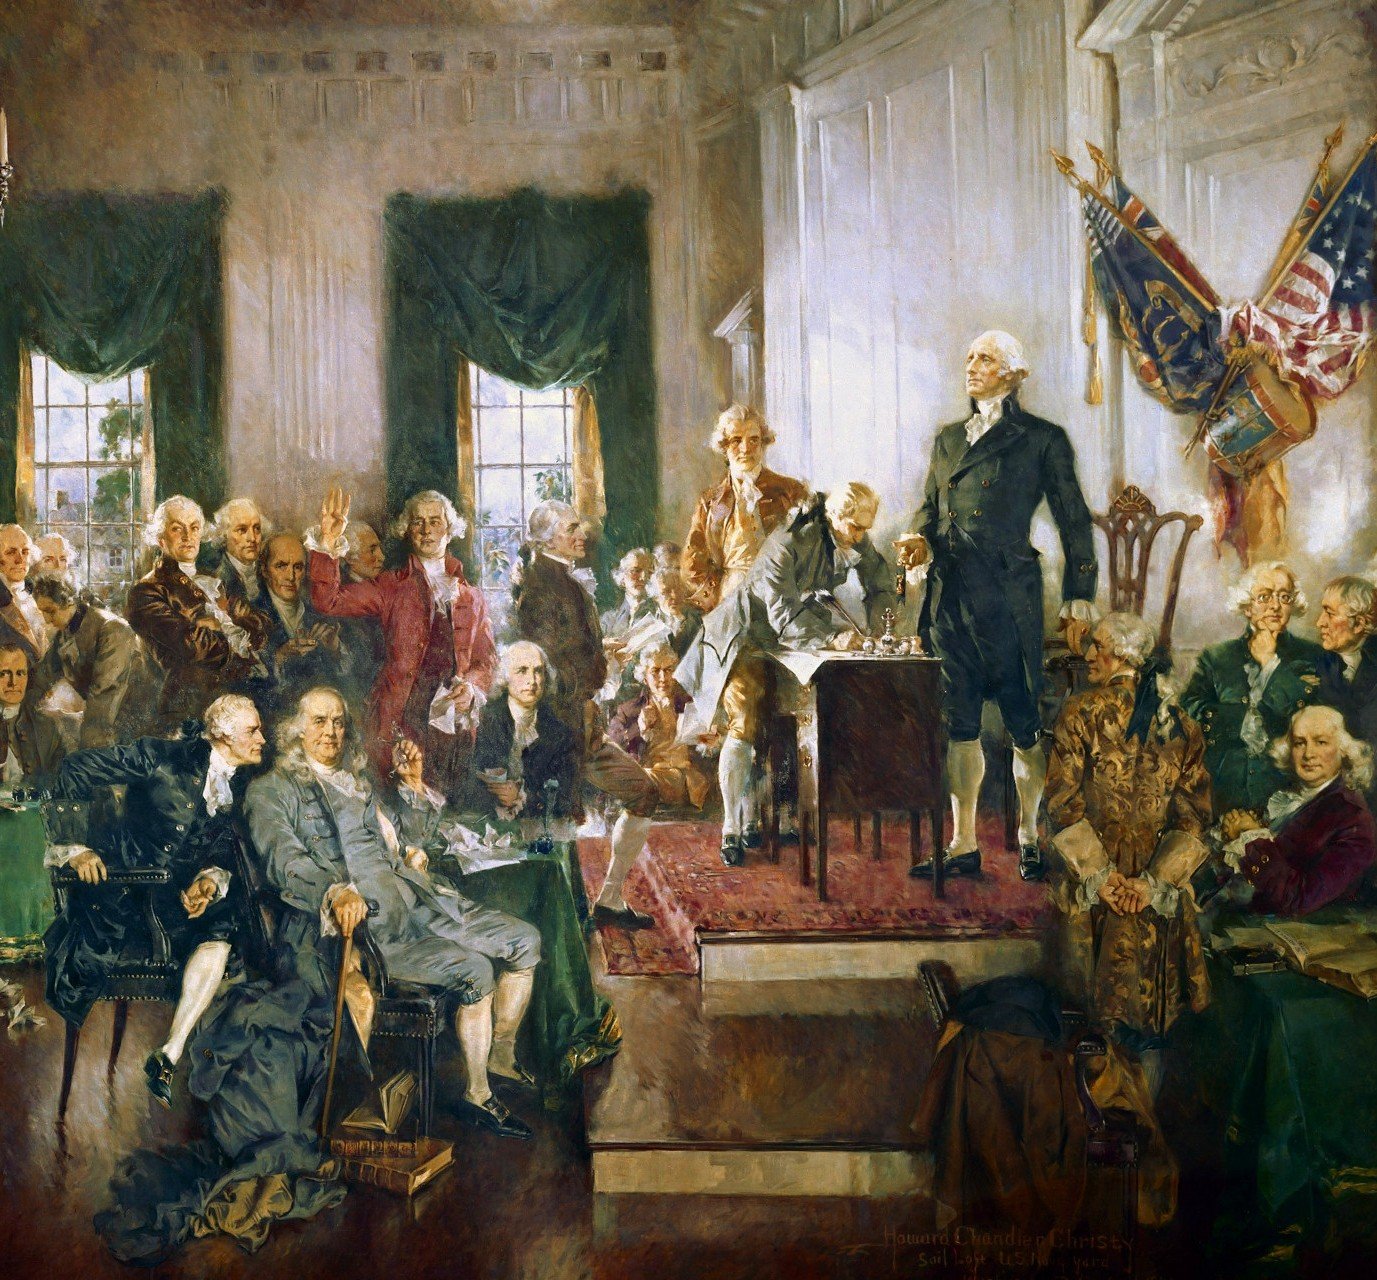 George Washington looks out over a crowd, with an American flag behind him and the Constitution on a desk in front of him being signed by a delegate